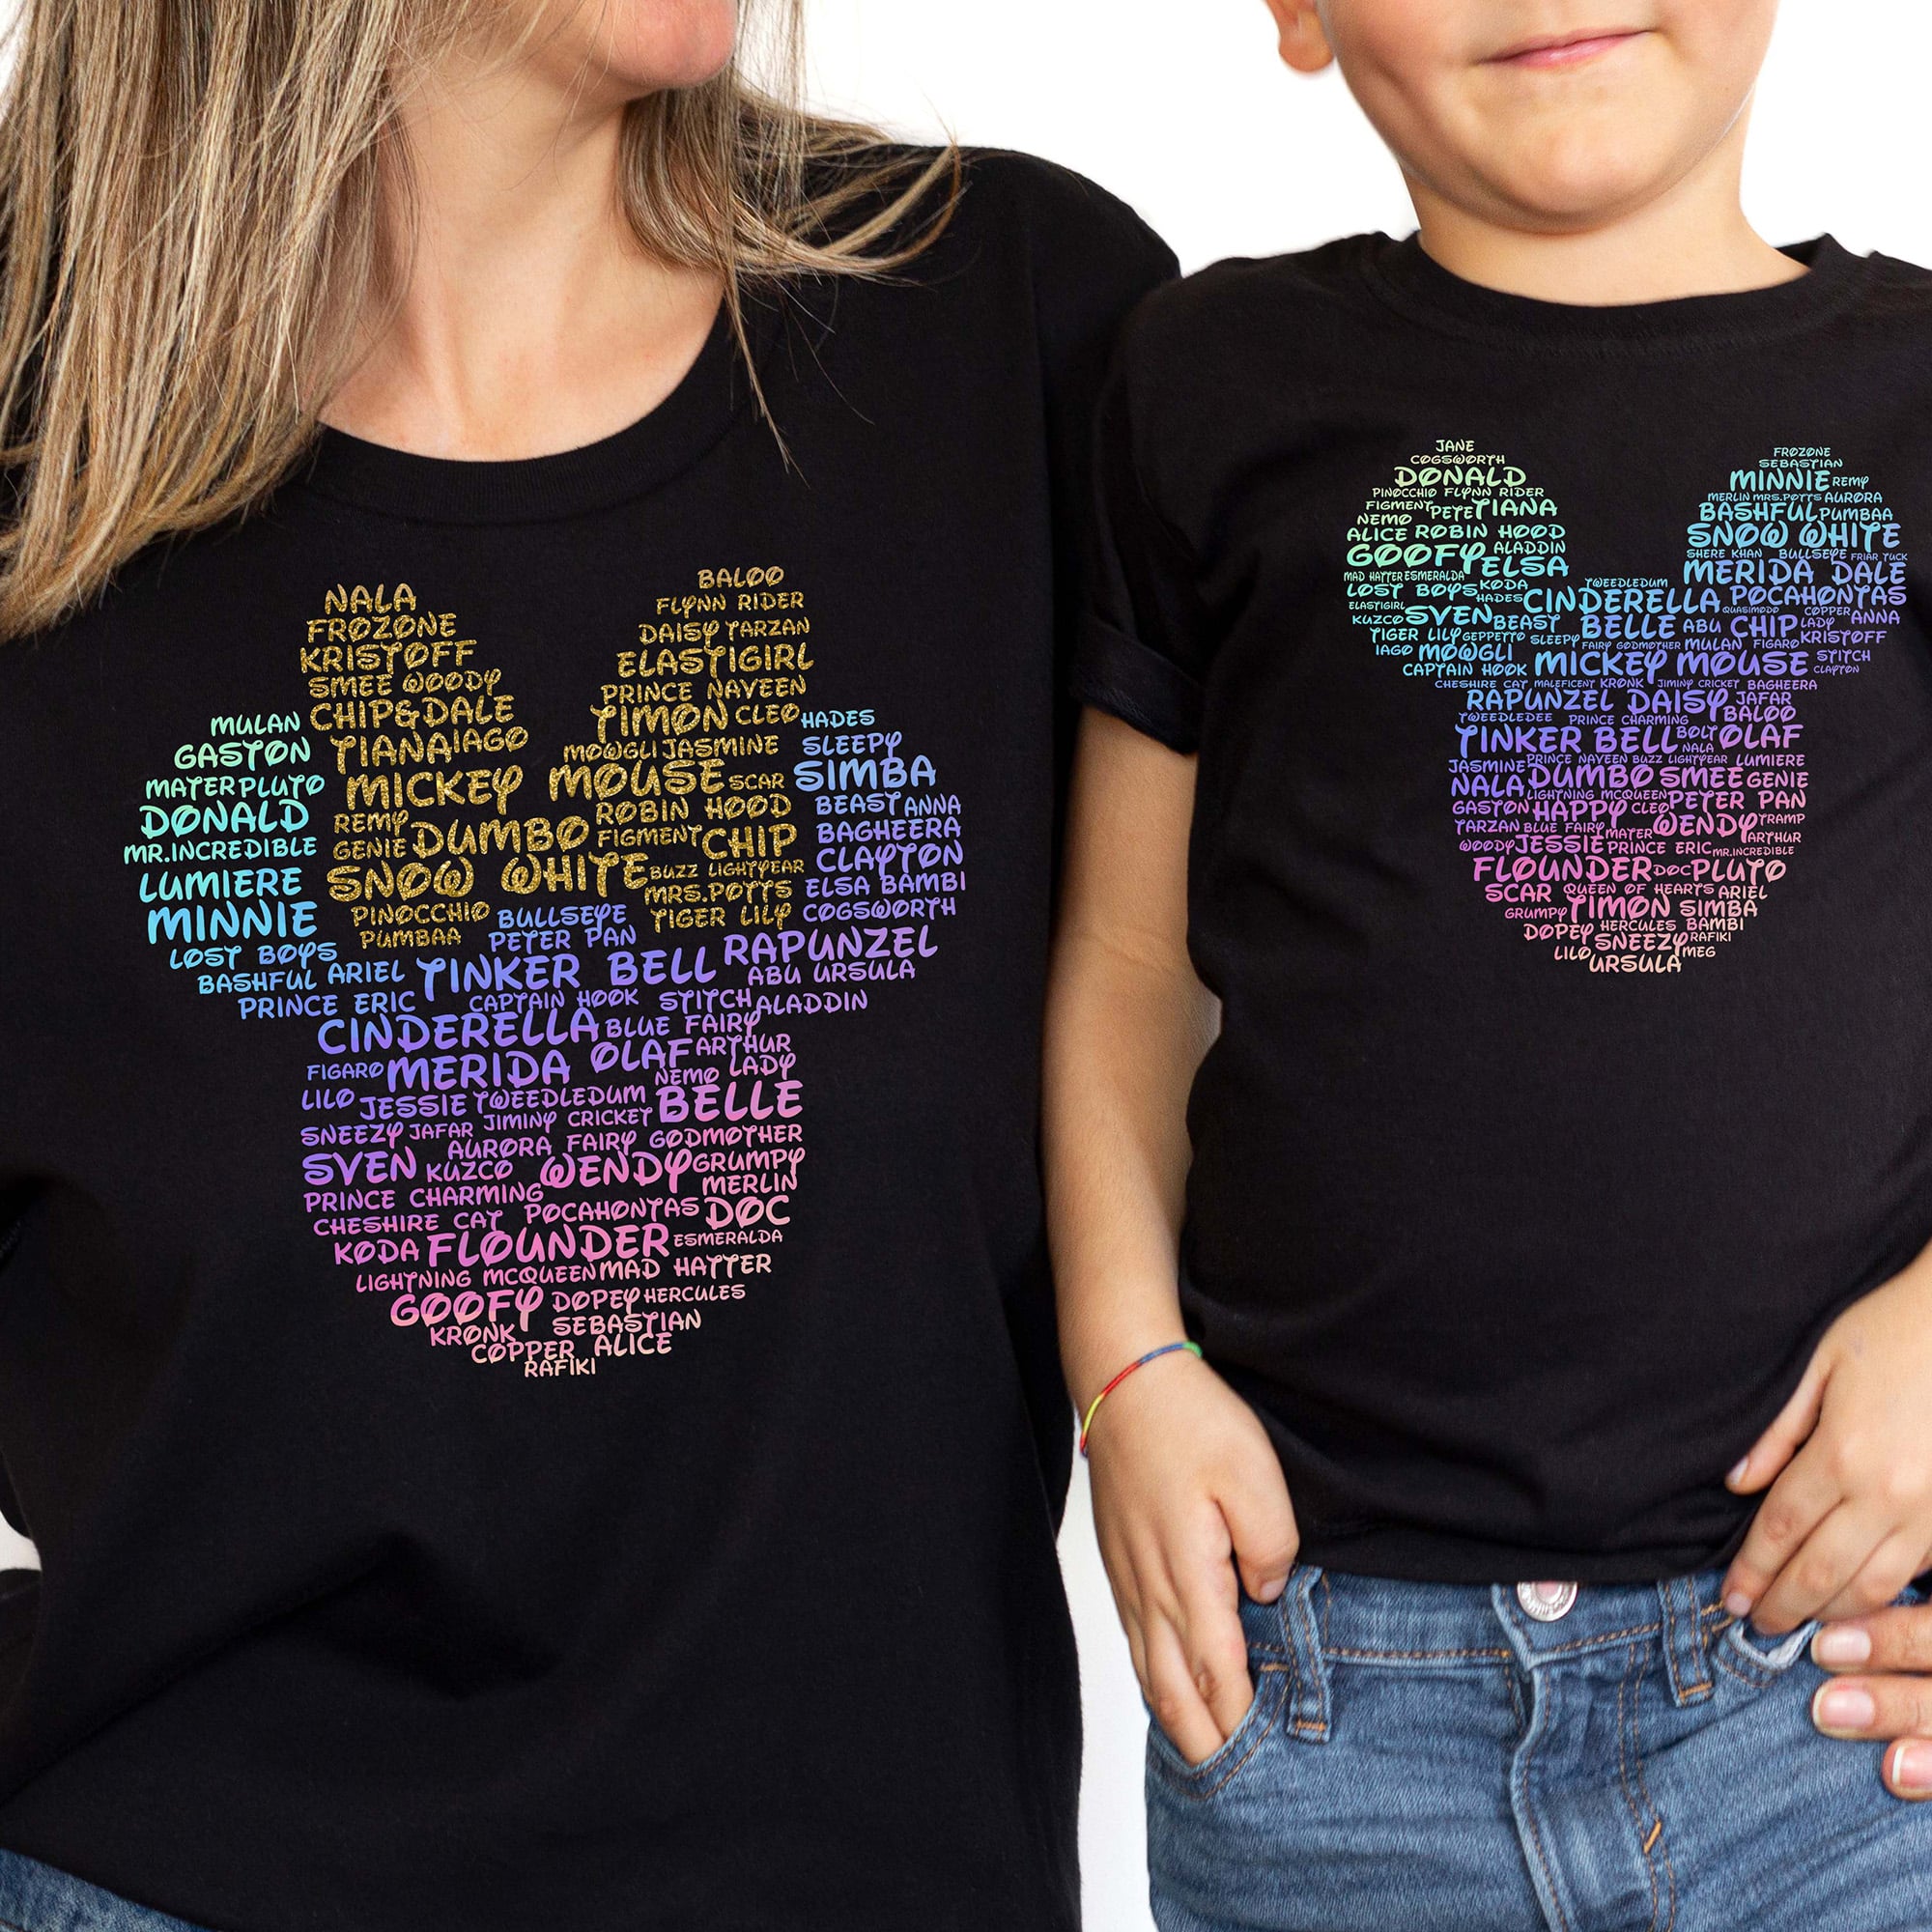 WDW 50th Anniversary Family Vacation Shirts for Disney World